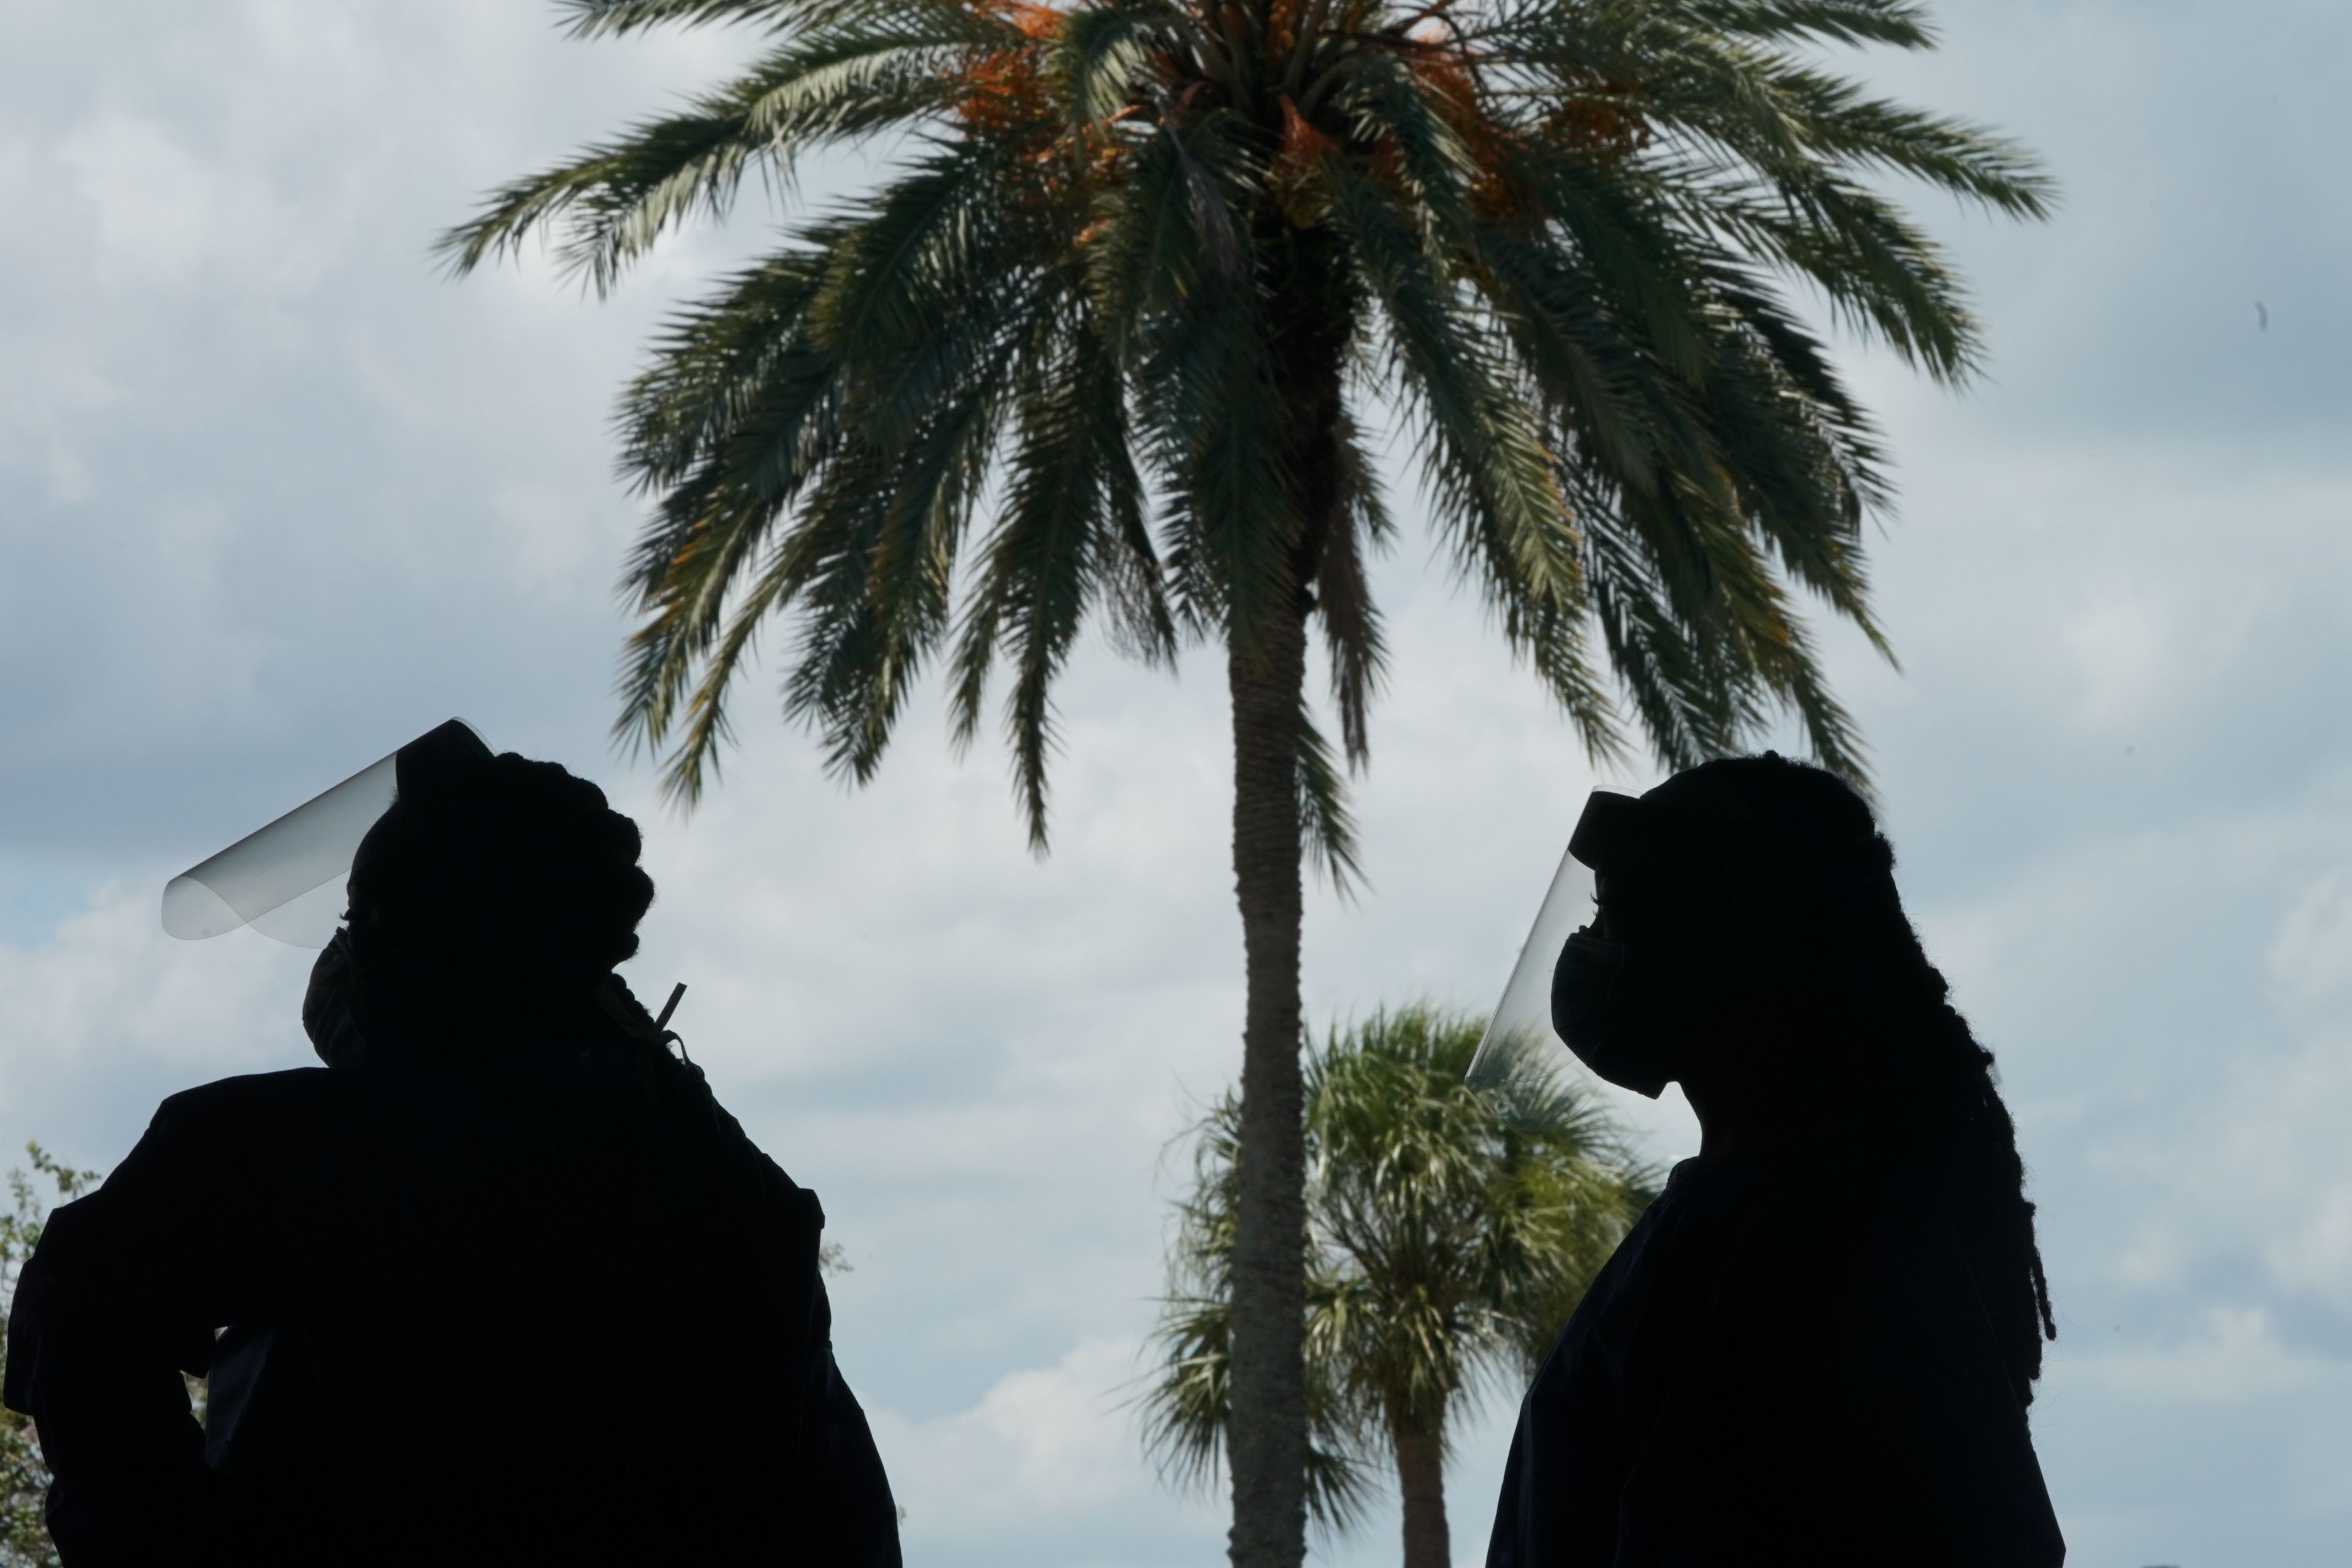 Two medical workers in silhouette at an outdoor Covid testing facility with palm trees in the background.